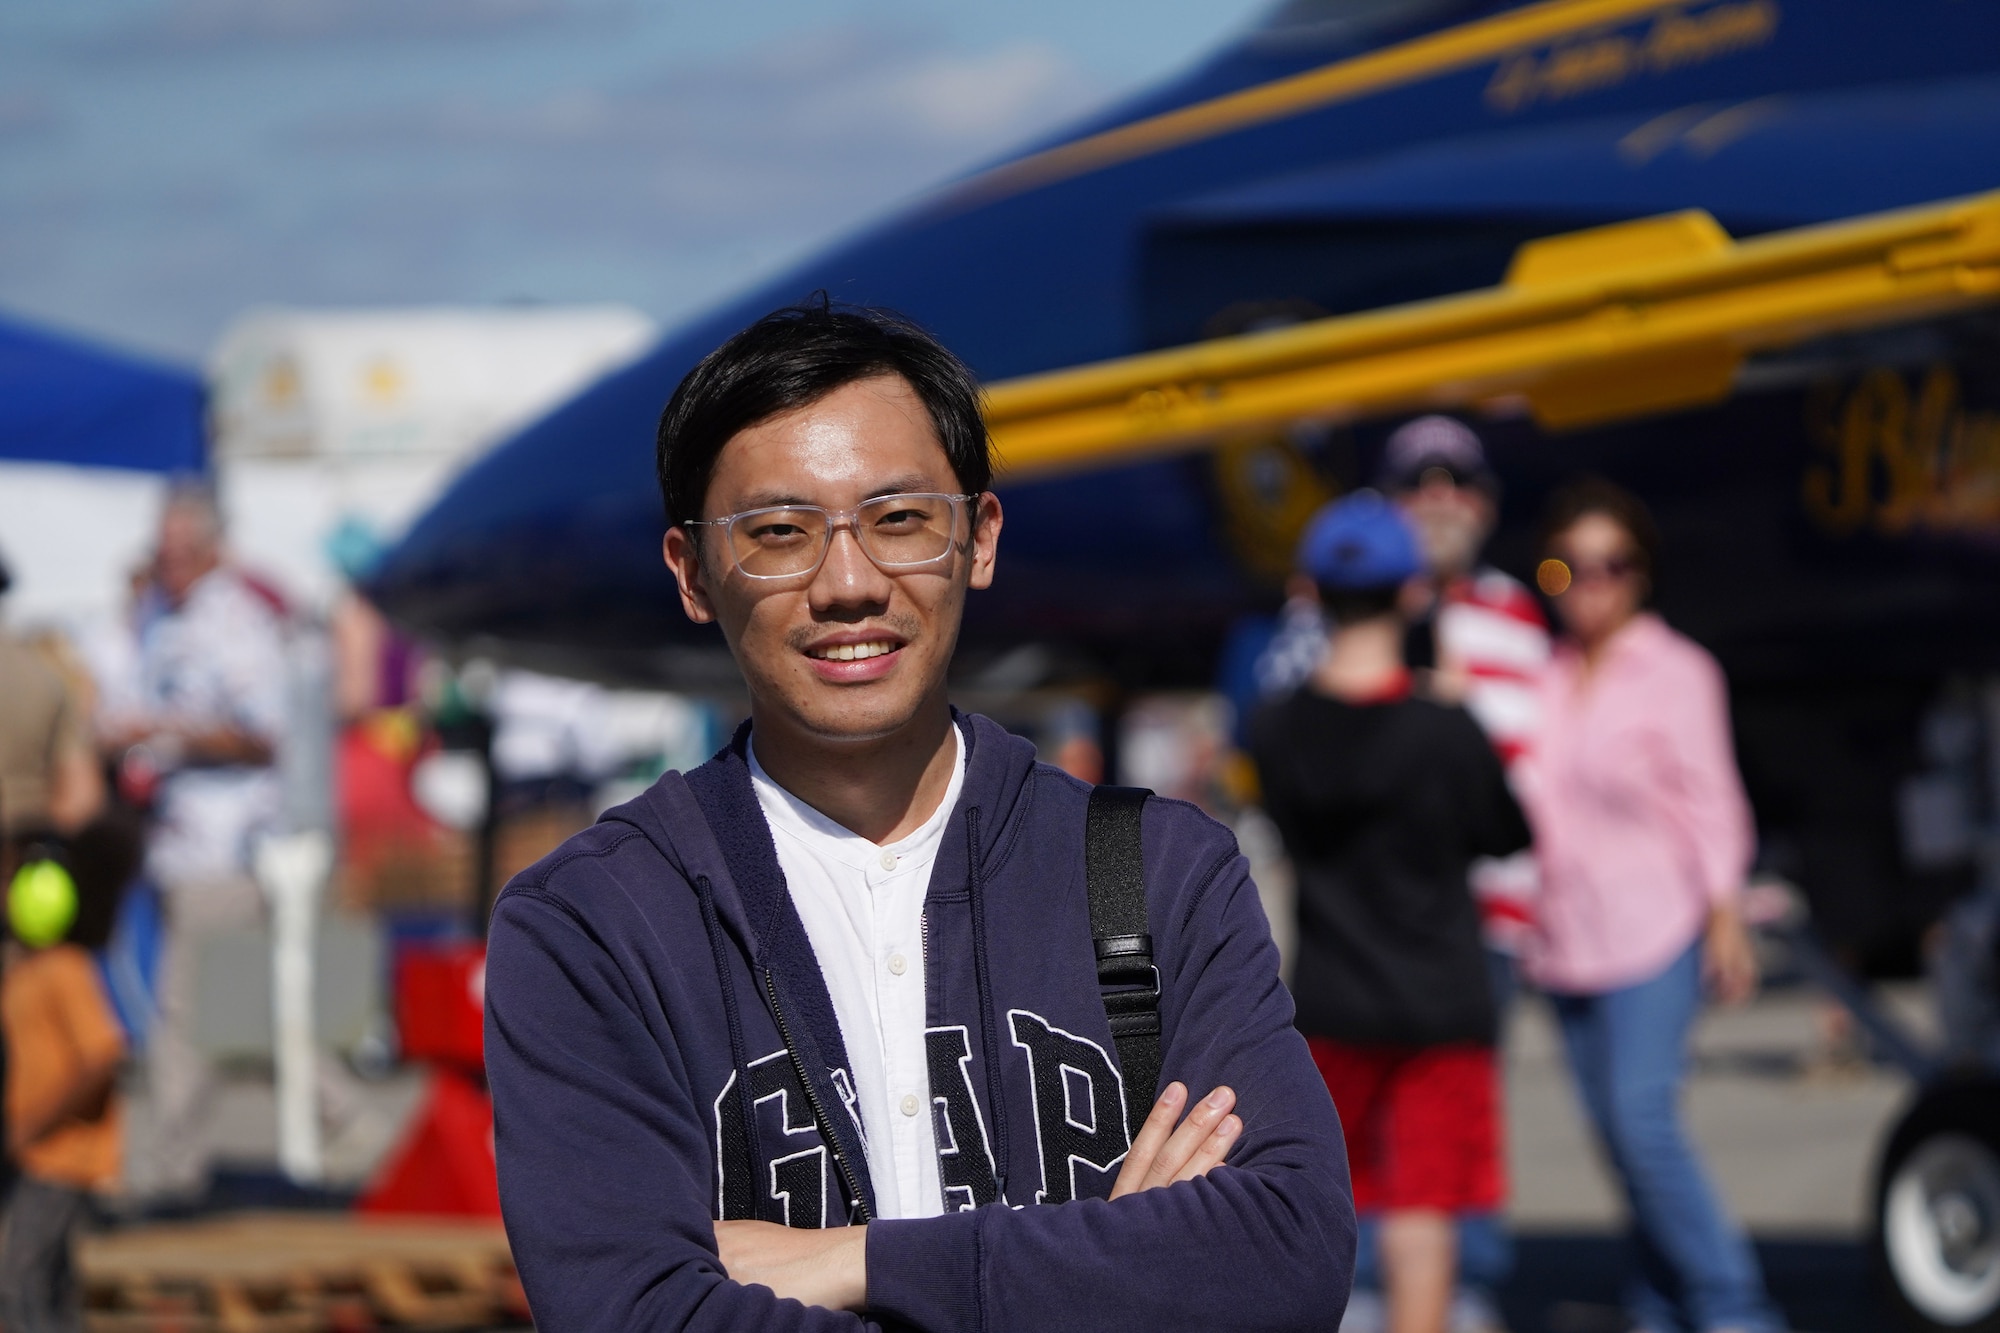 Capt. Lin, international weather officer student, poses for photo at the Blue Angels Homecoming air show at the Naval Air Station, Pensacola, Florida, Nov. 11, 2022.